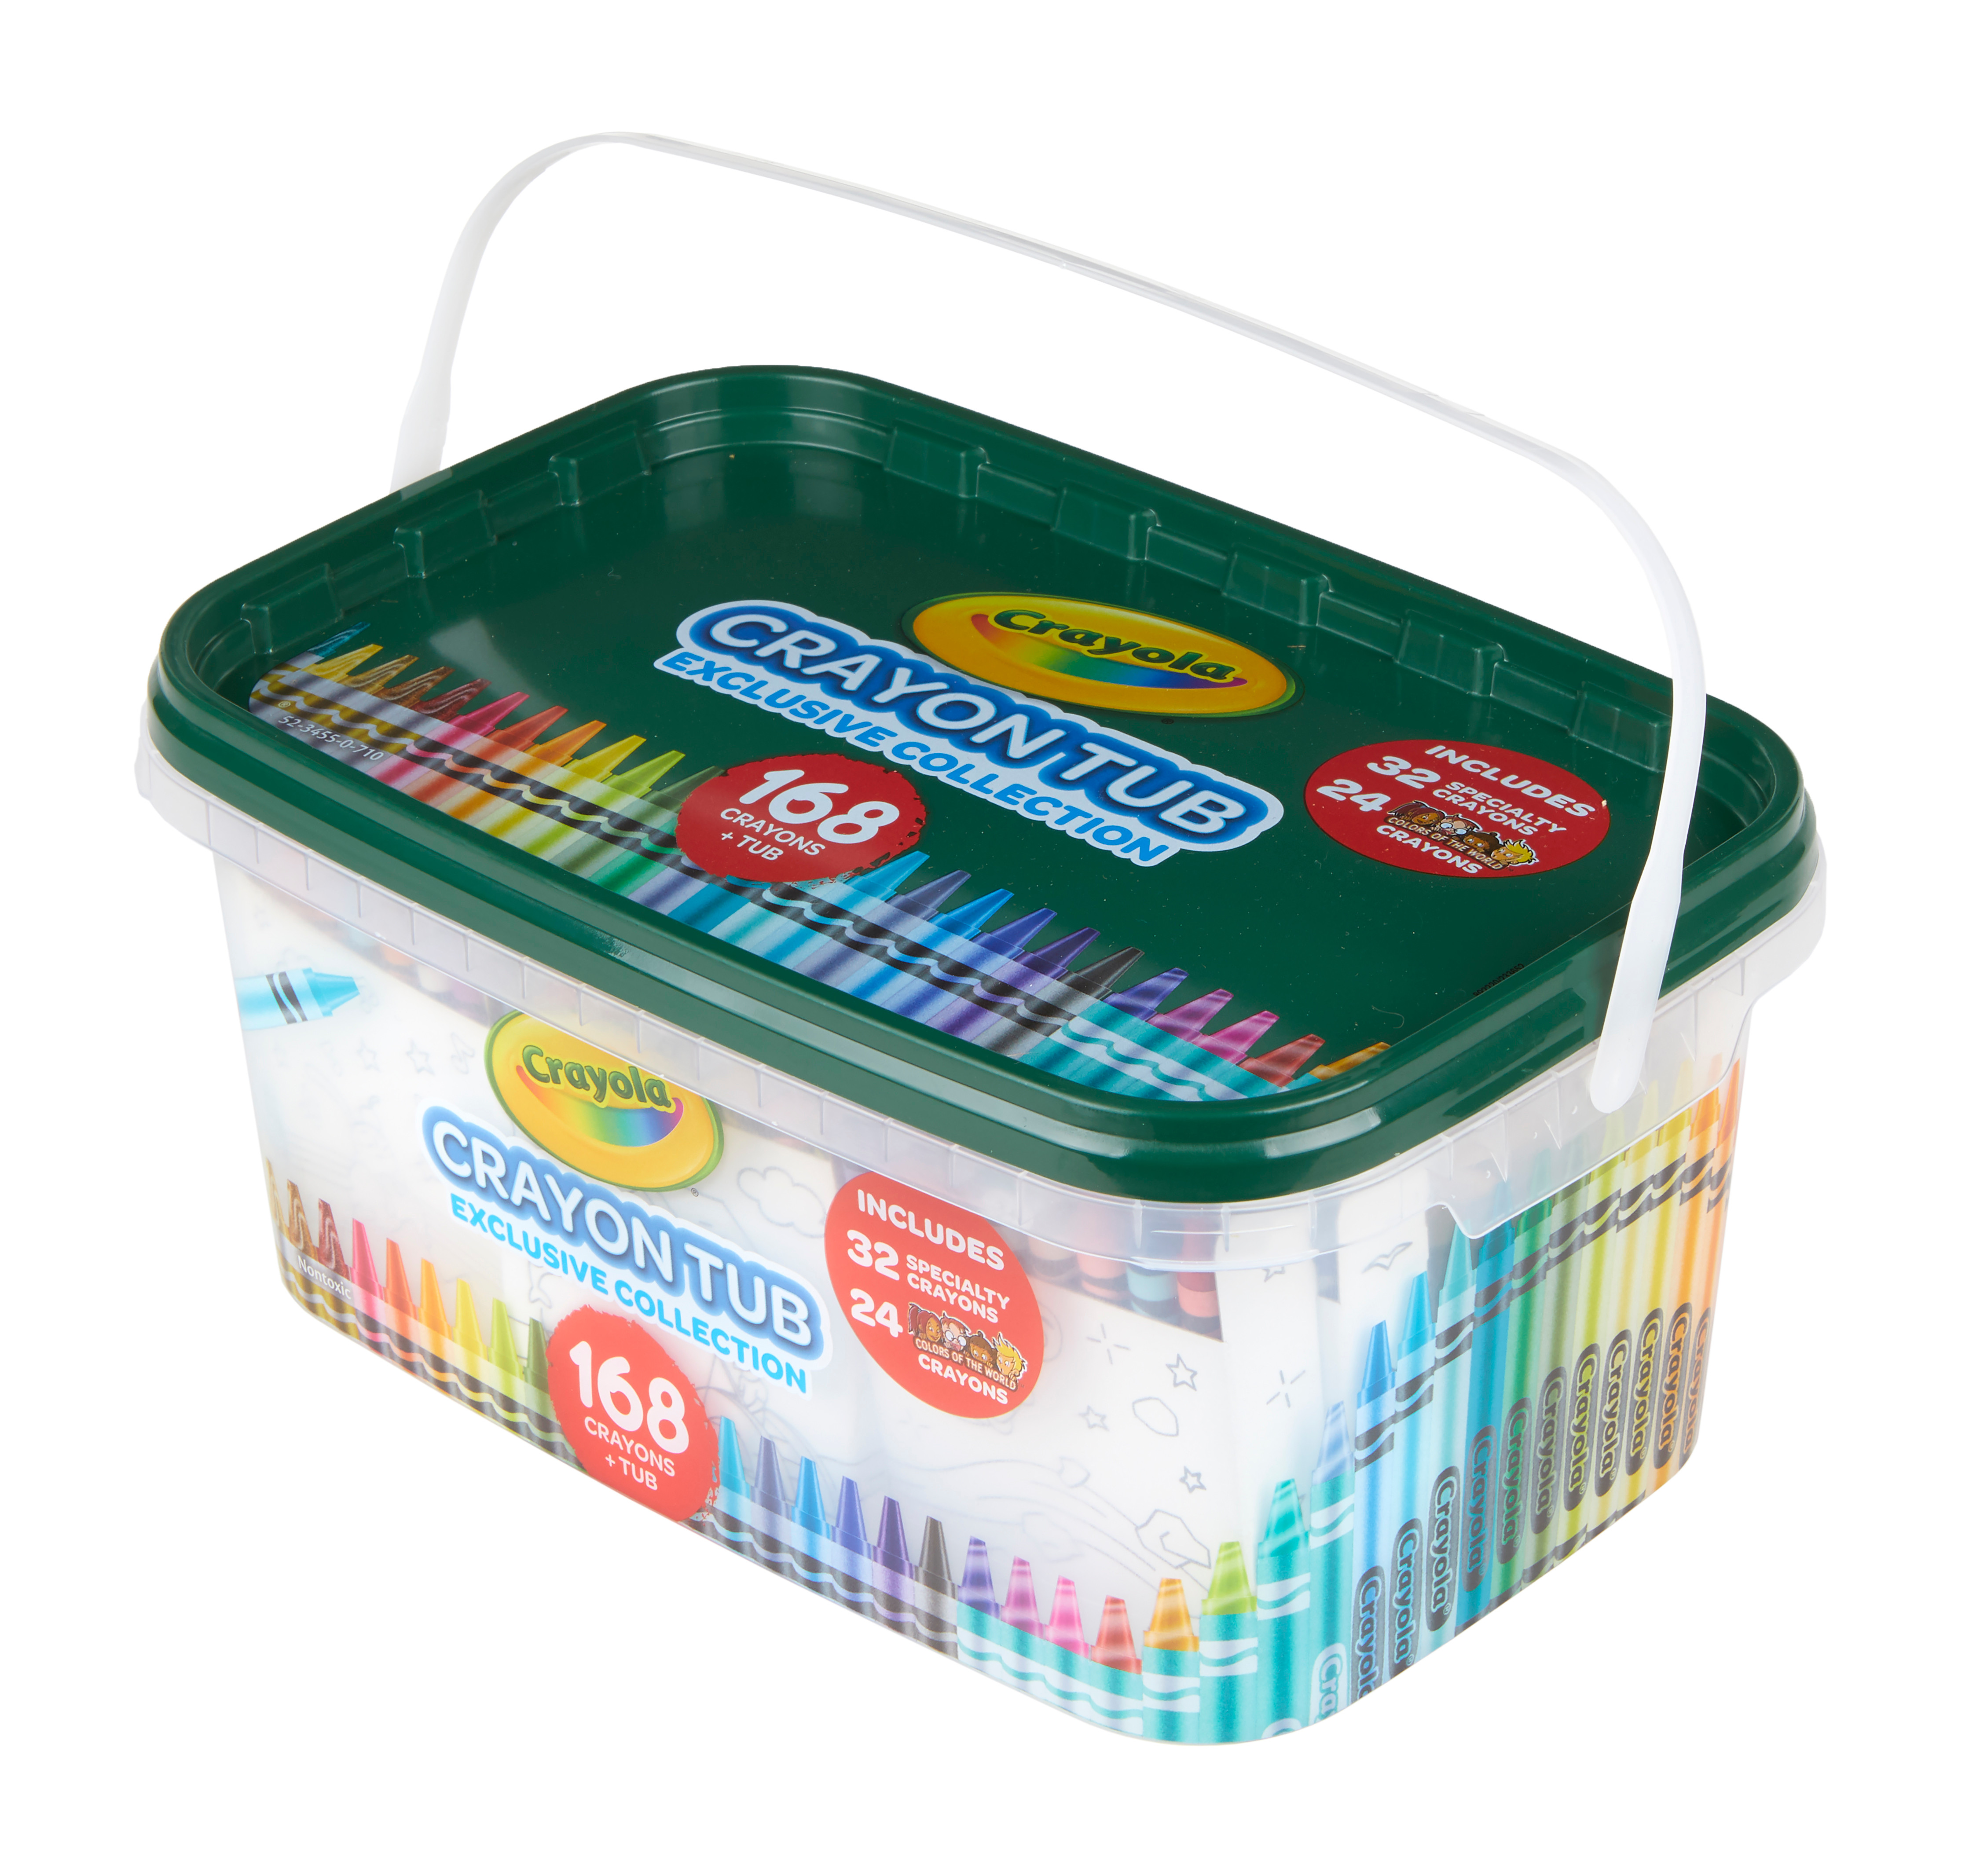 Crayola Crayon & Storage Tub, School Supplies, 168 Ct, with Colors of the World Crayons, Holiday Gift for Kids - image 4 of 9